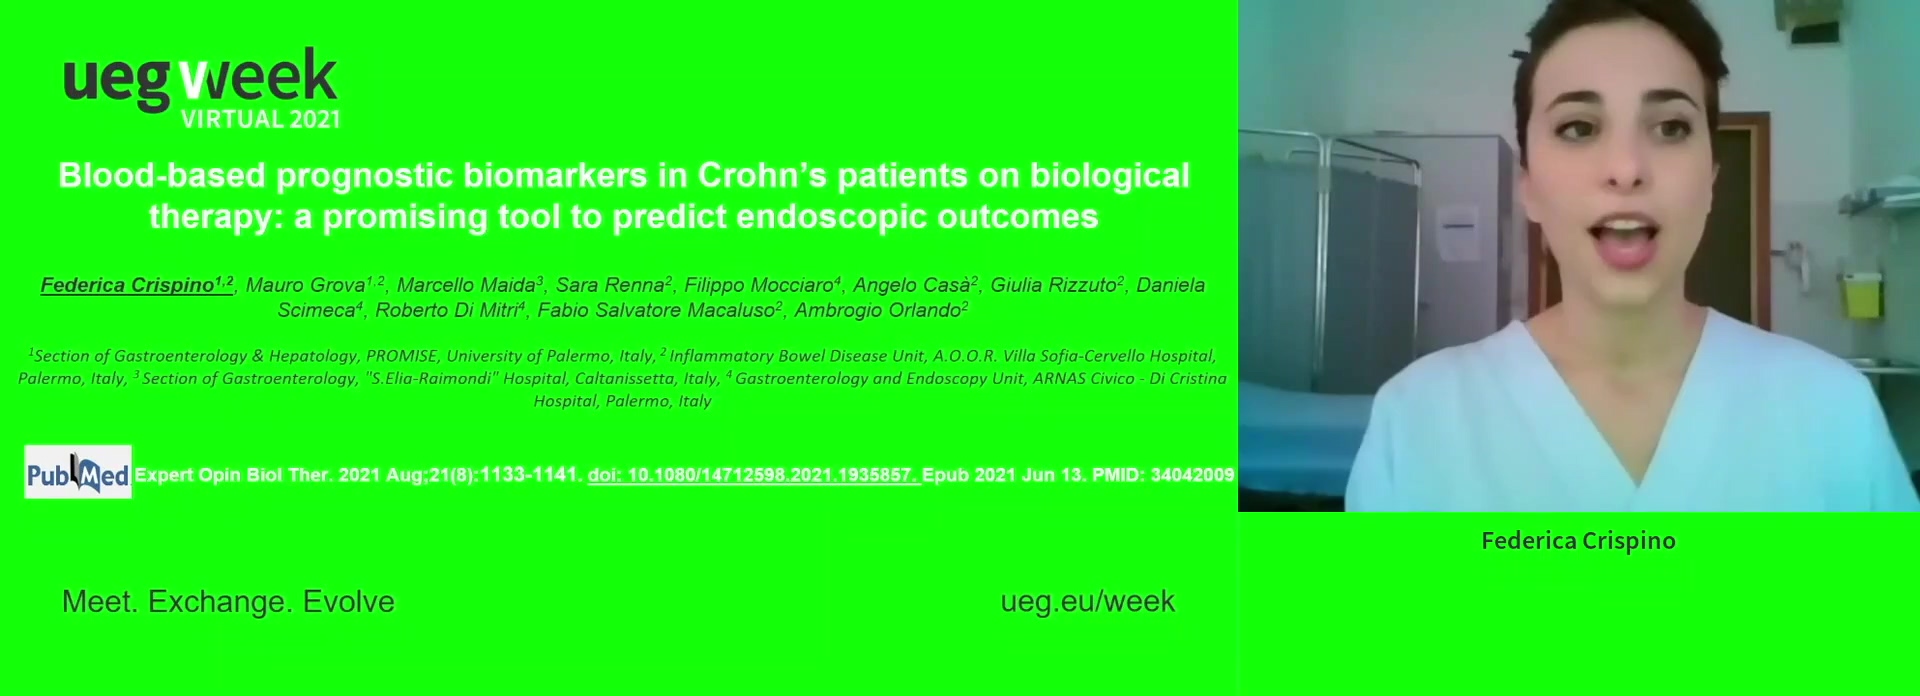 BLOOD-BASED PROGNOSTIC BIOMARKERS IN CROHN’S PATIENTS ON BIOLOGICS: A PROMISING TOOL TO PREDICT ENDOSCOPIC OUTCOMES